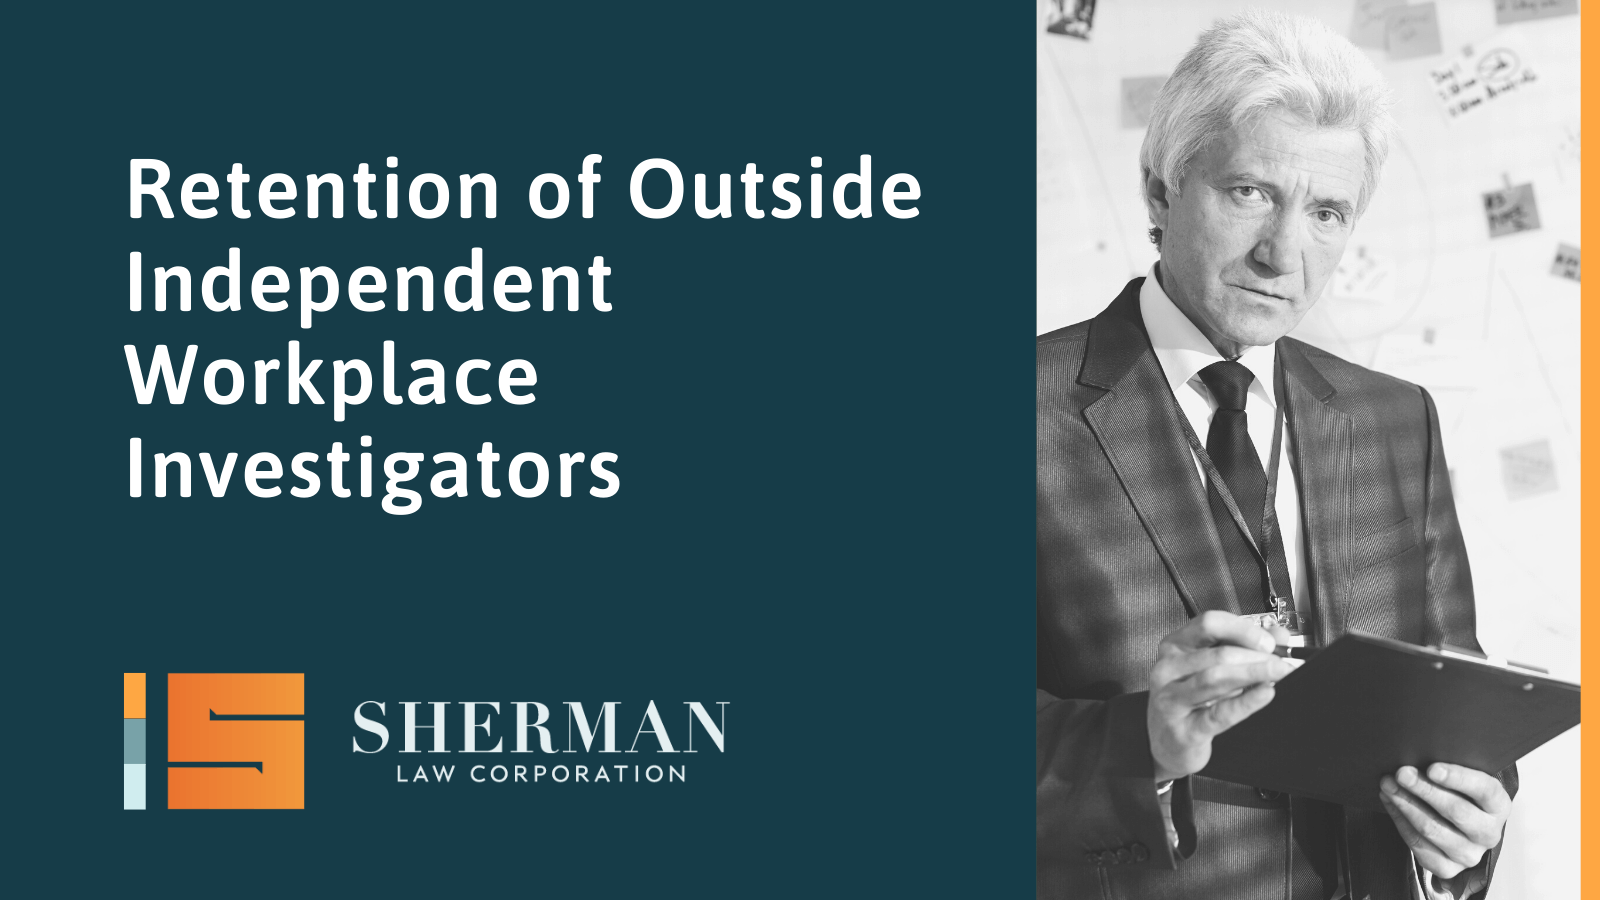 Retention of Outside Independent Workplace Investigators- california employment lawyer - sherman law corporation